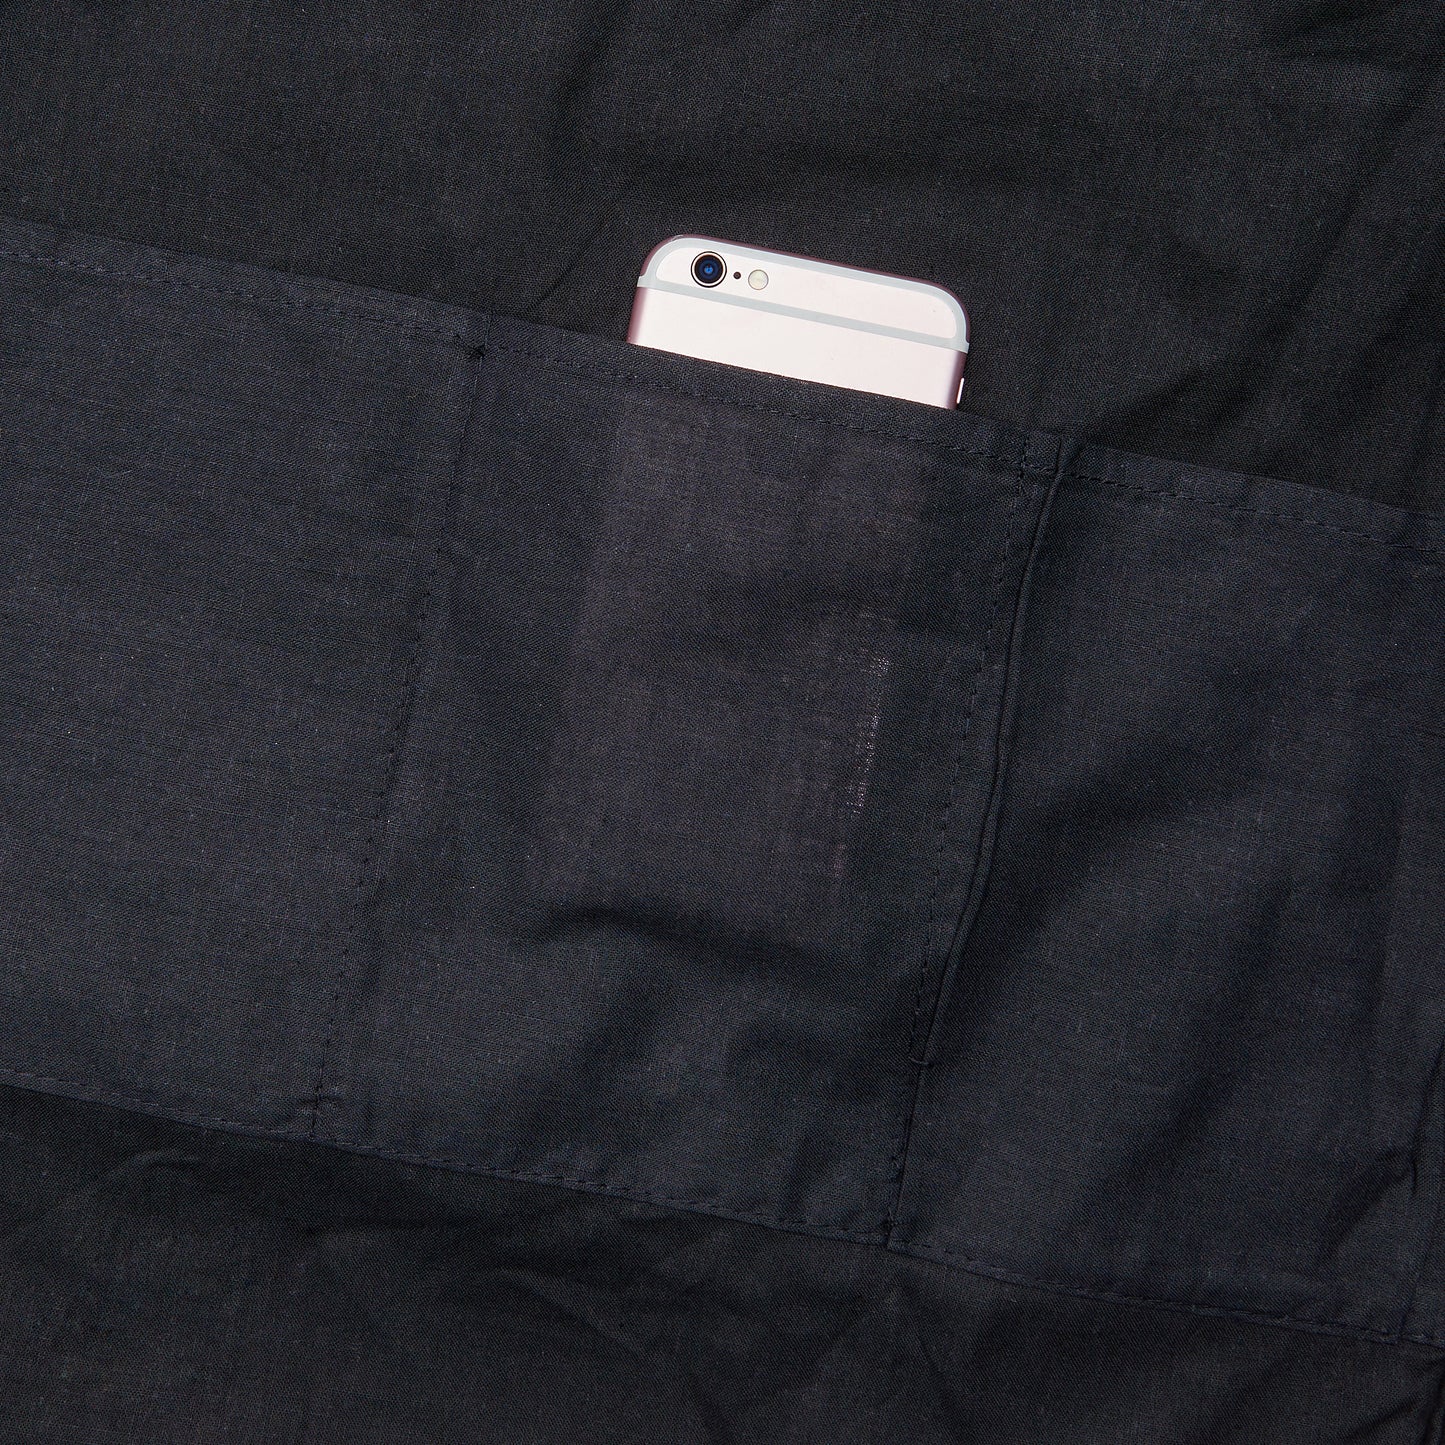 a cell phone in the pocket of a black jacket